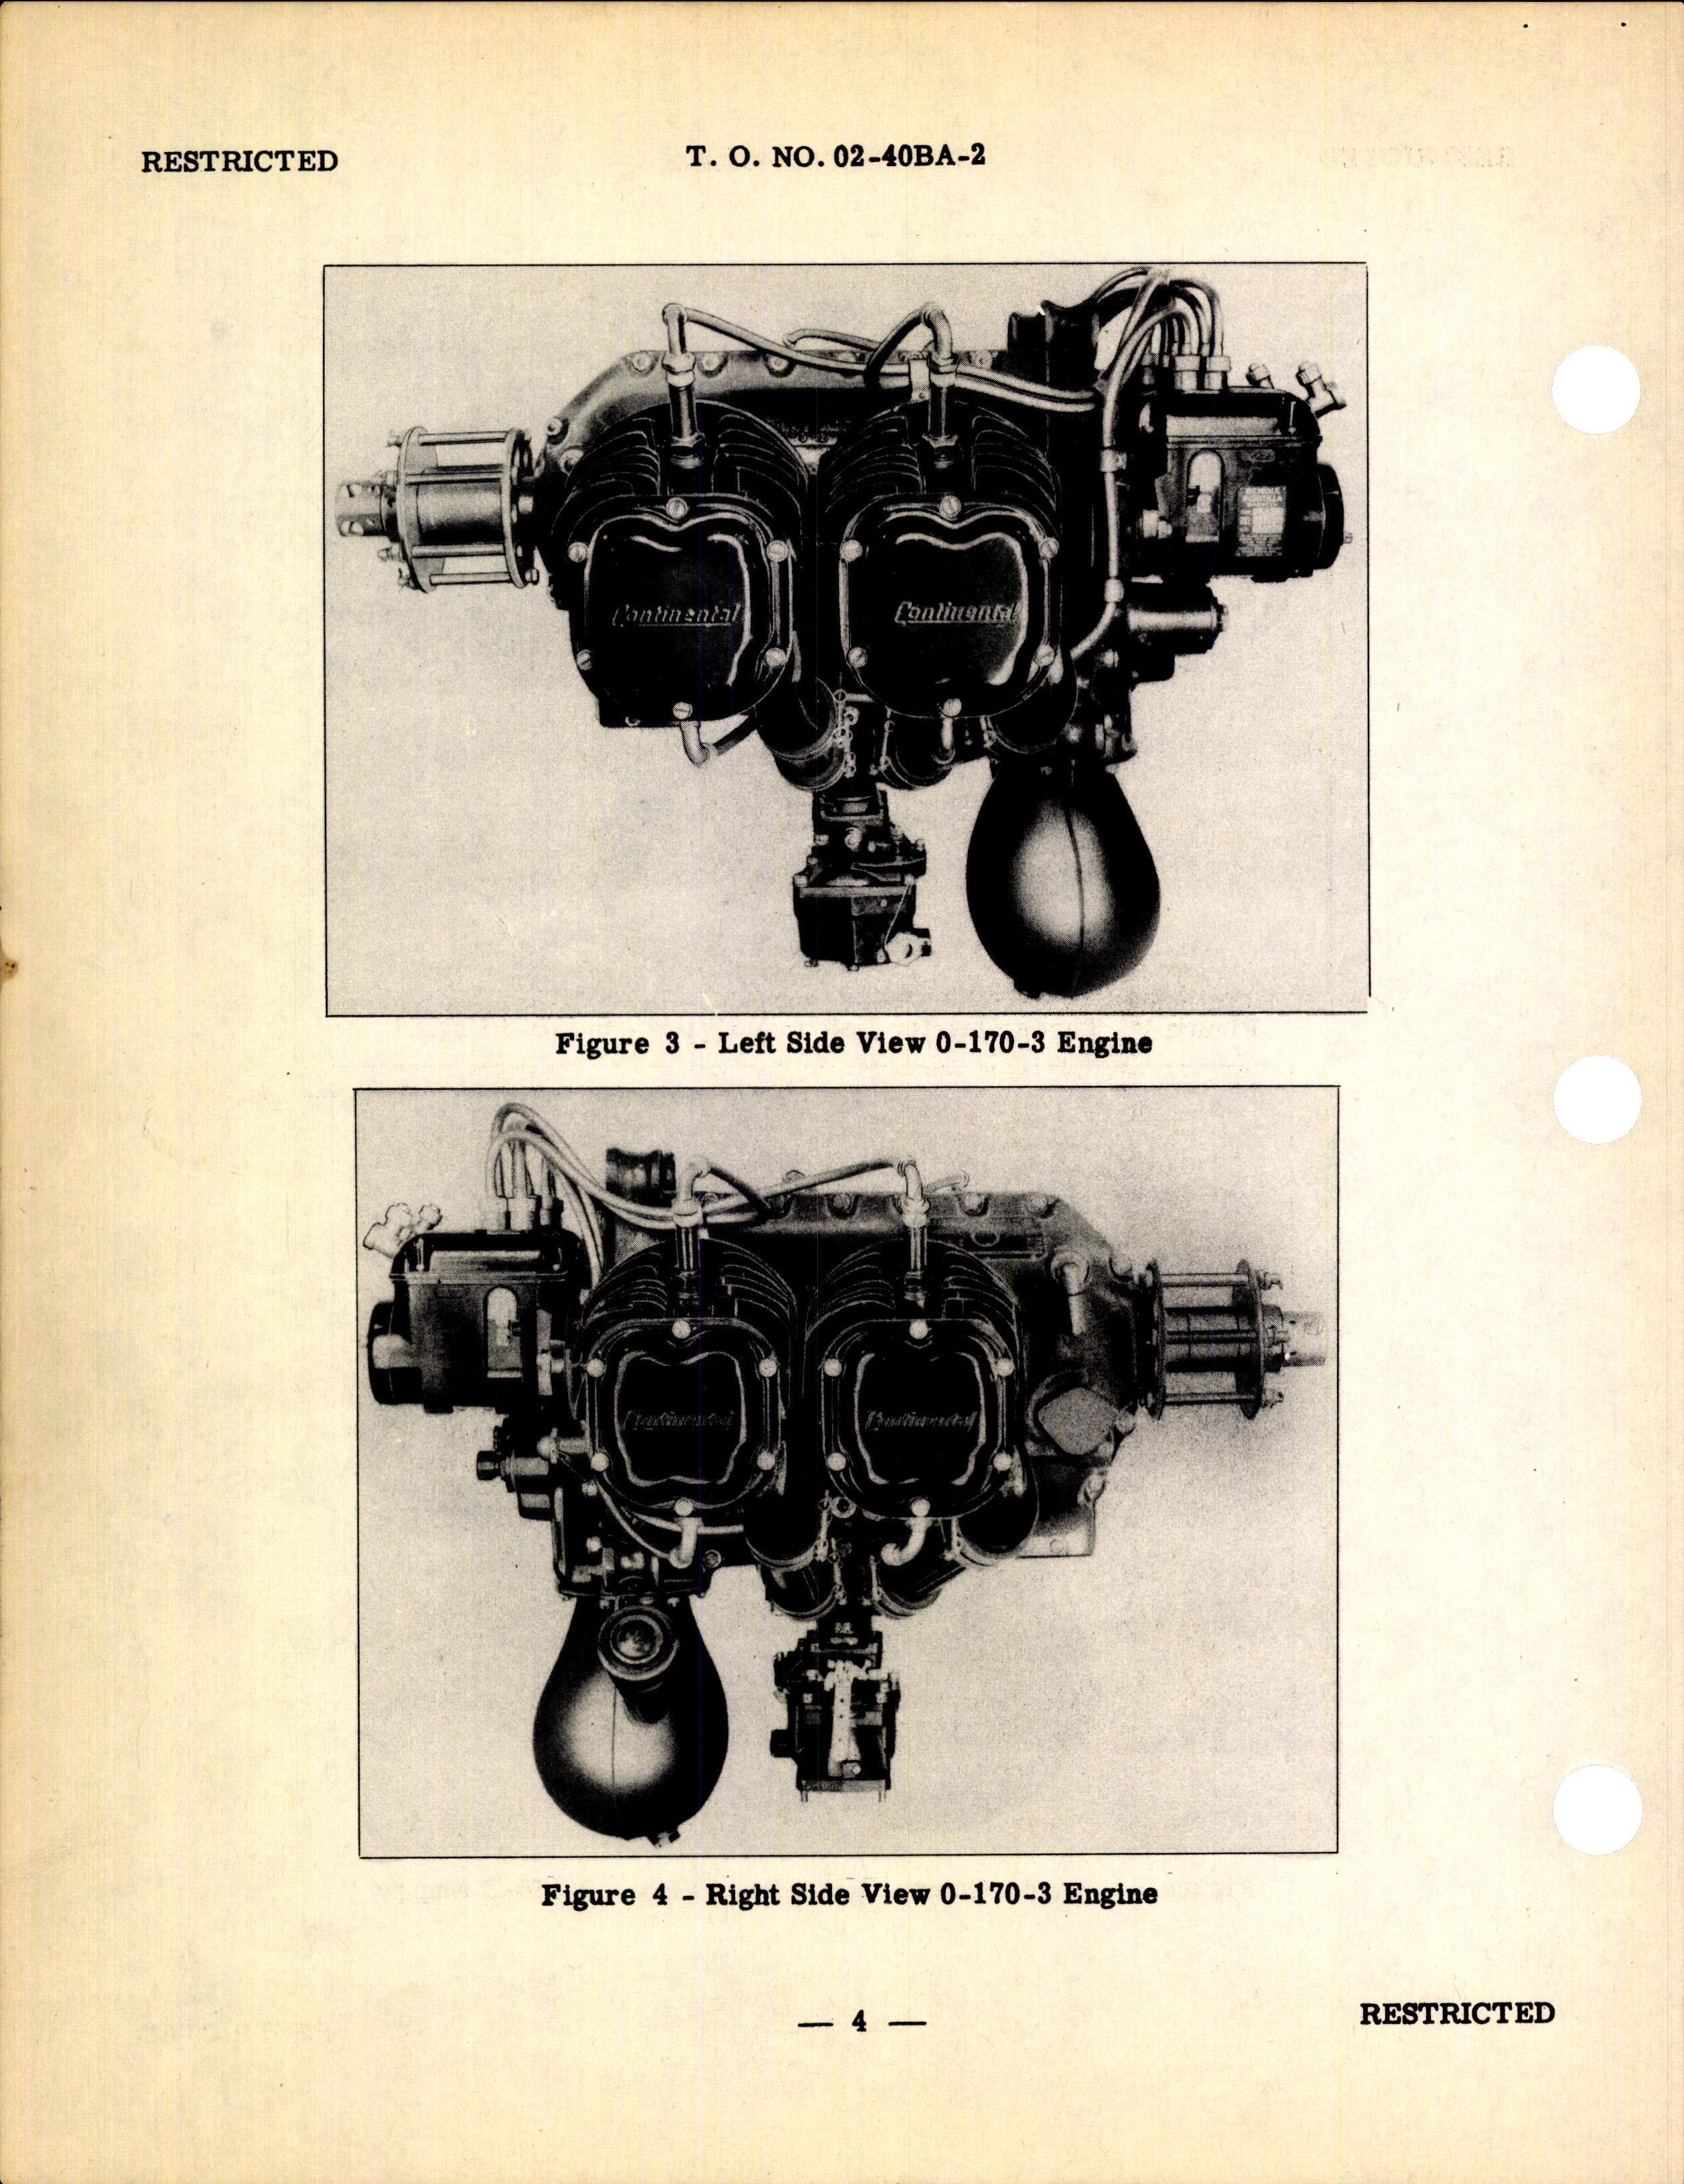 Sample page 6 from AirCorps Library document: Service Instructions for the Model 0-170-3 Engine & Associated Models